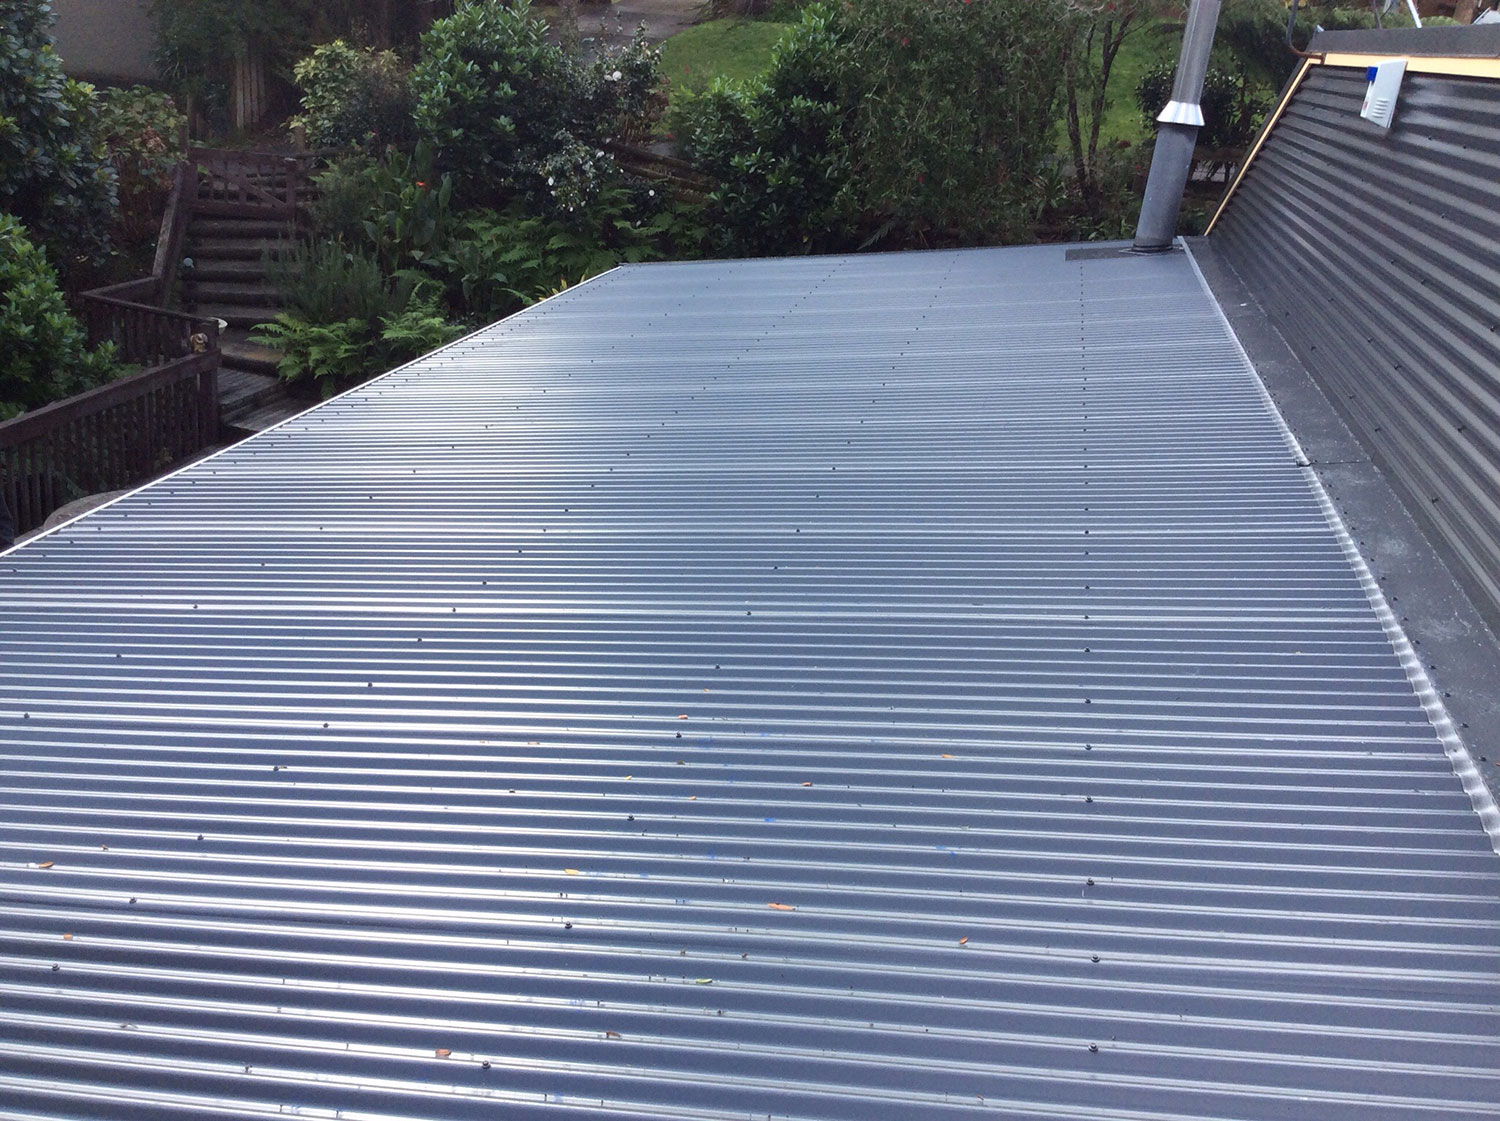 auckland roofing solutions services auckland and new zealand wide new roofs repair cladding and more Project gallery 79